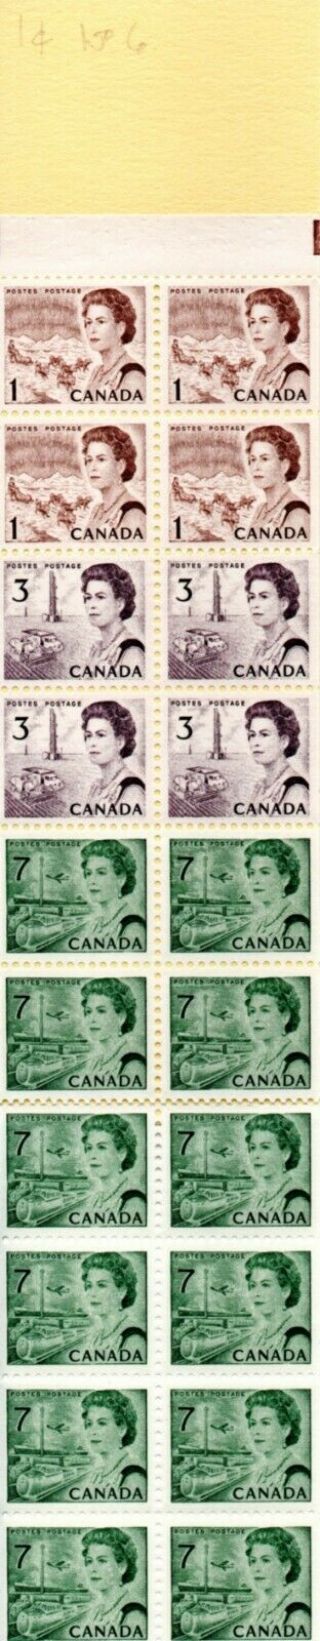 Canada 1970 ' s $1.  00 Booklet SG SB74 with Canadian Centennial 1c,  3c and 7c UM/M 2